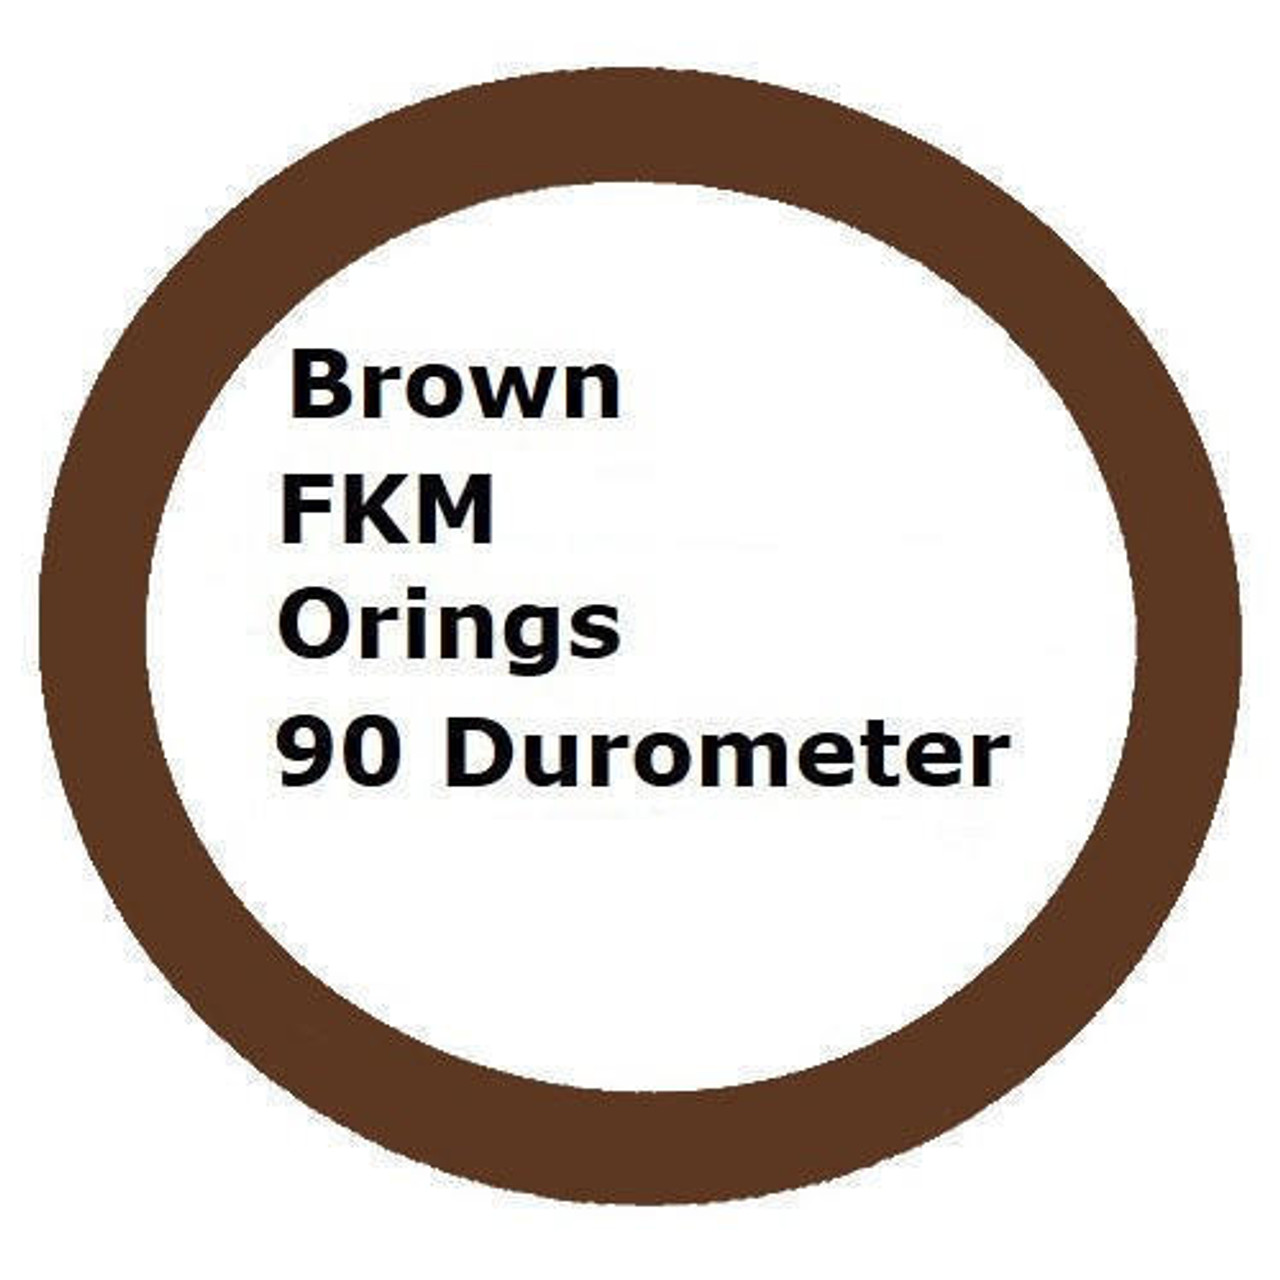 FKM 90 Brown Orings Size 260 Price for 1 pc